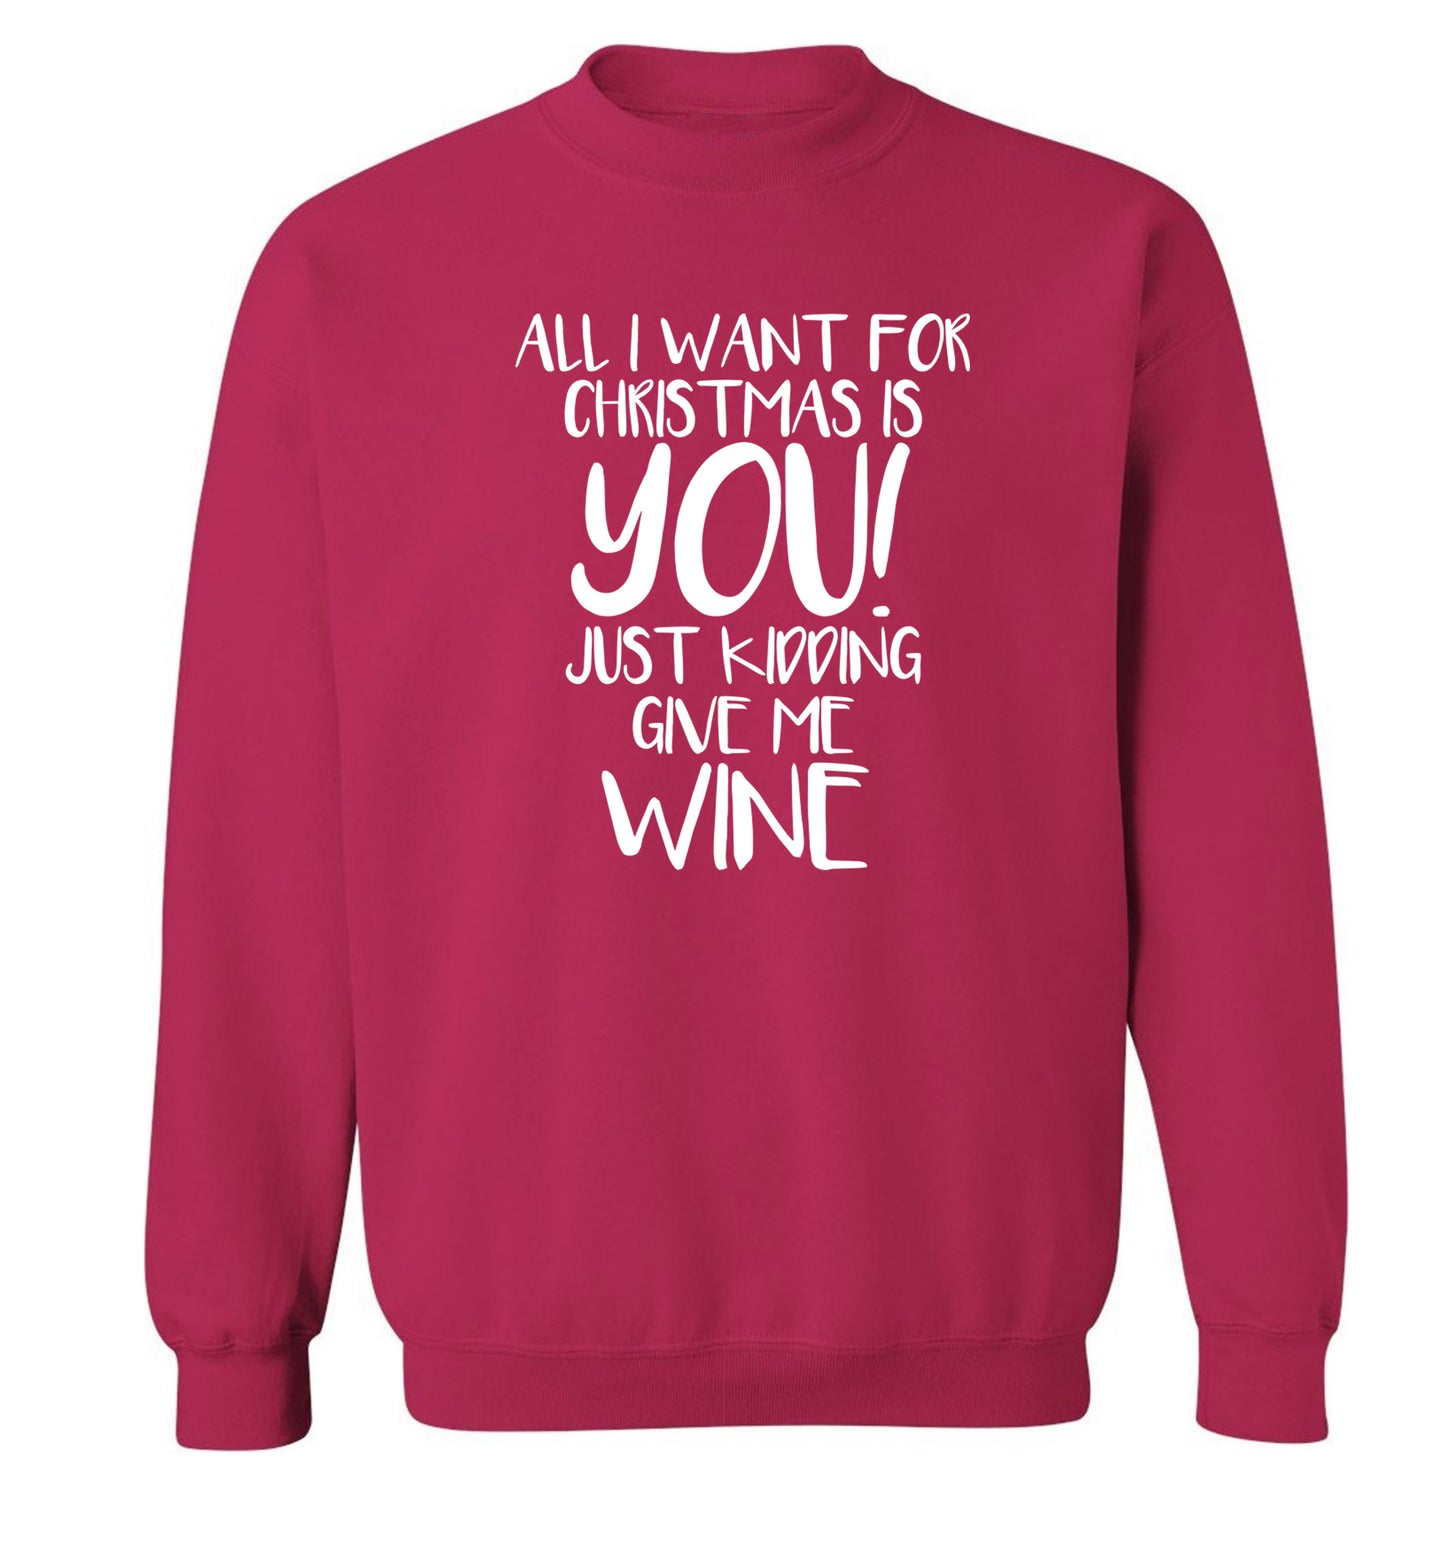 All I want for christmas is you just kidding give me the wine Adult's unisex pink Sweater 2XL